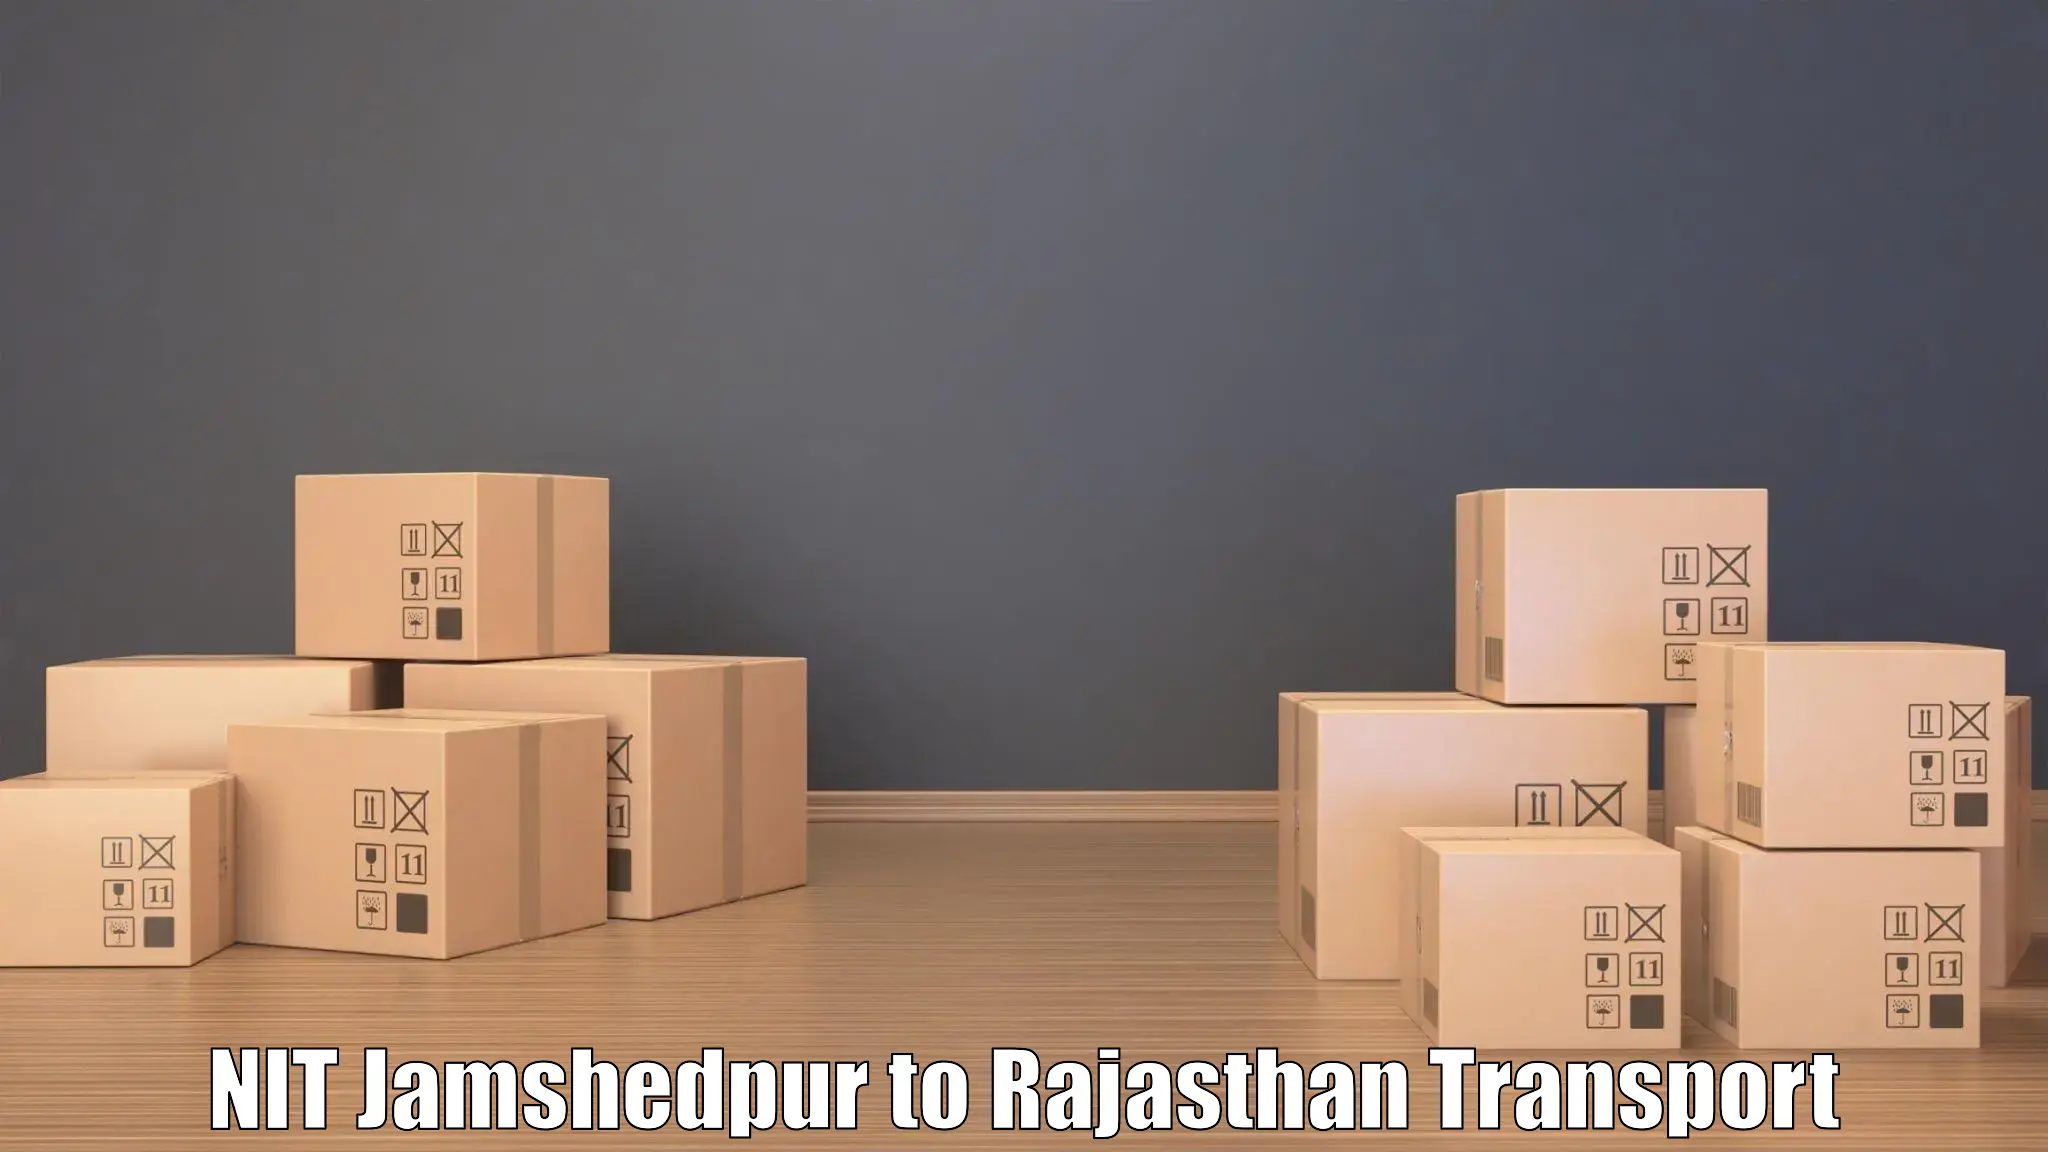 Package delivery services NIT Jamshedpur to Piparcity